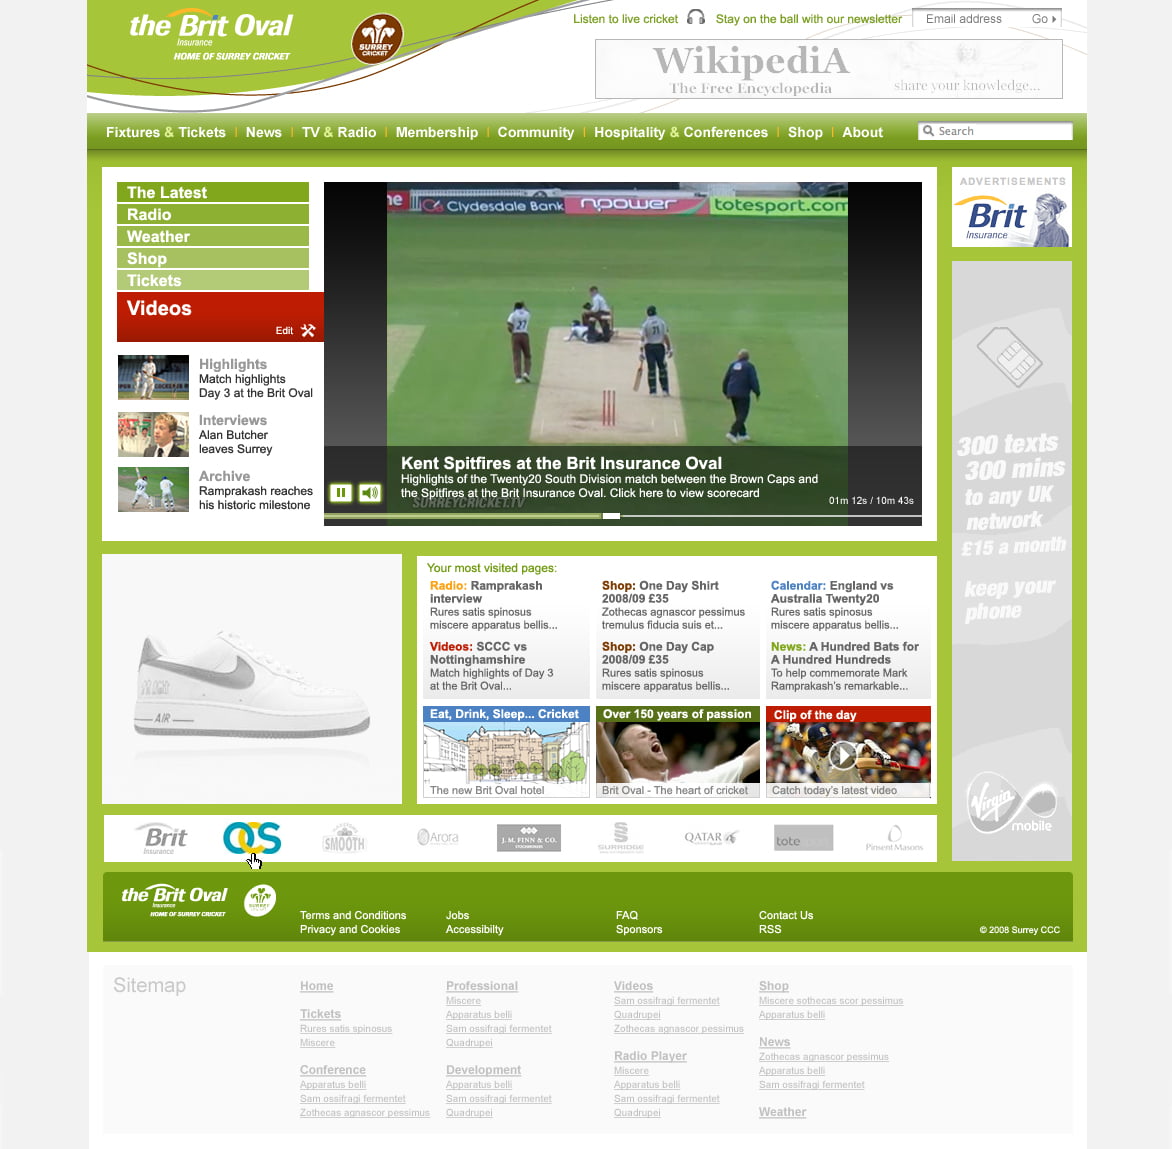 02_Oval_Home-video_Green_021008